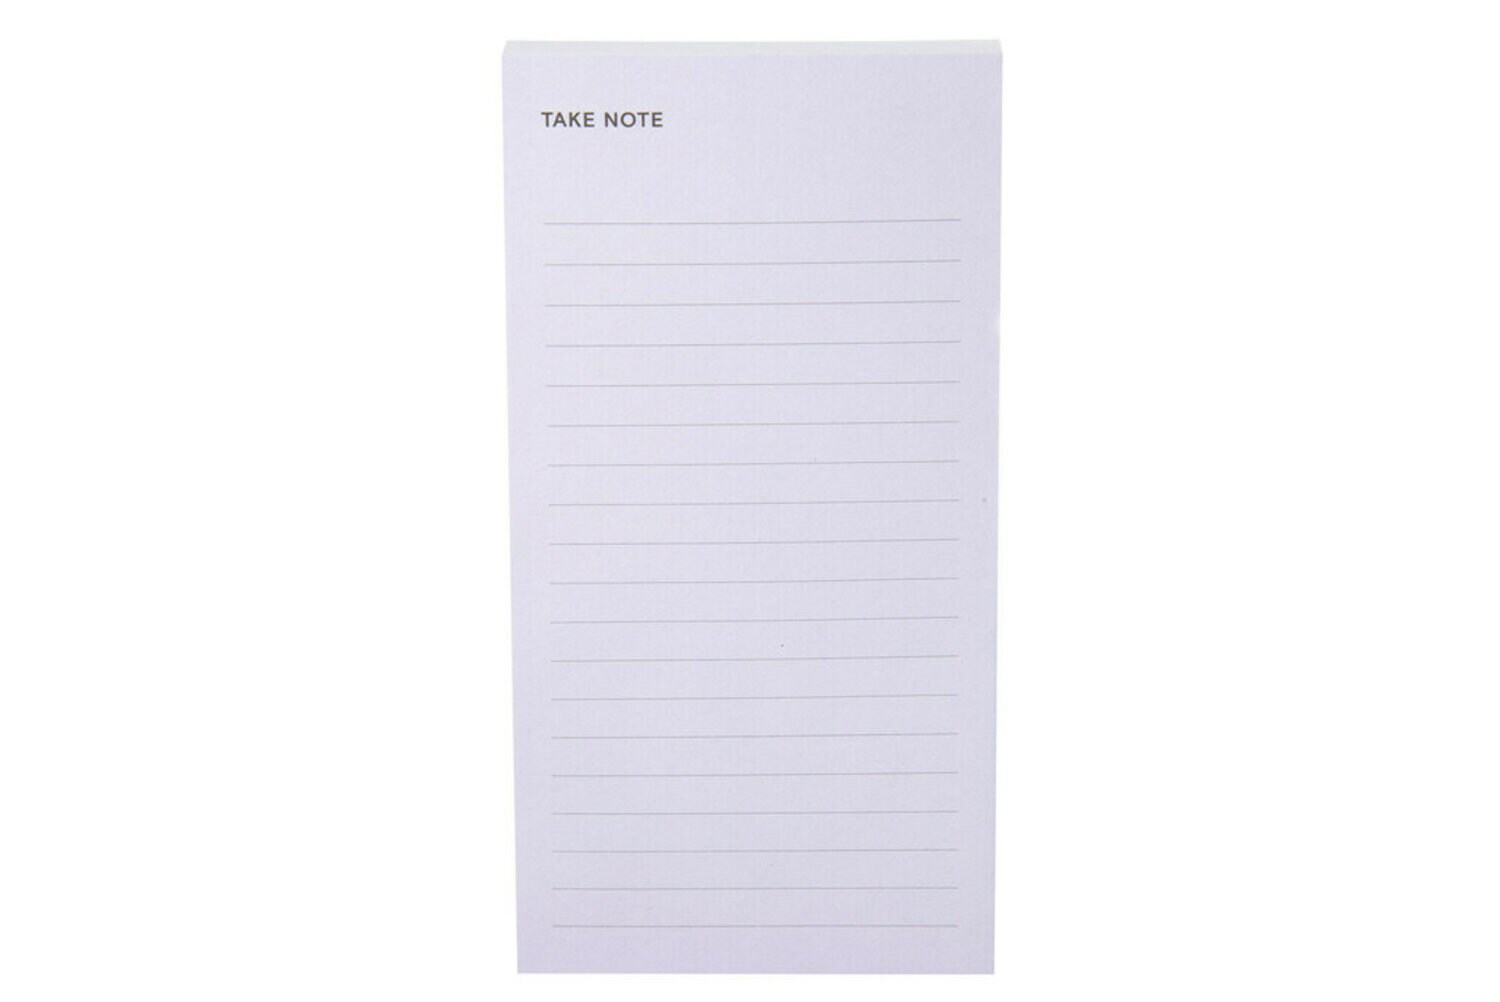 7100233963 - Post-it Printed Notes NTD-36-GRY, 2.9 in x 5.7 in (73 mm x 144 mm)